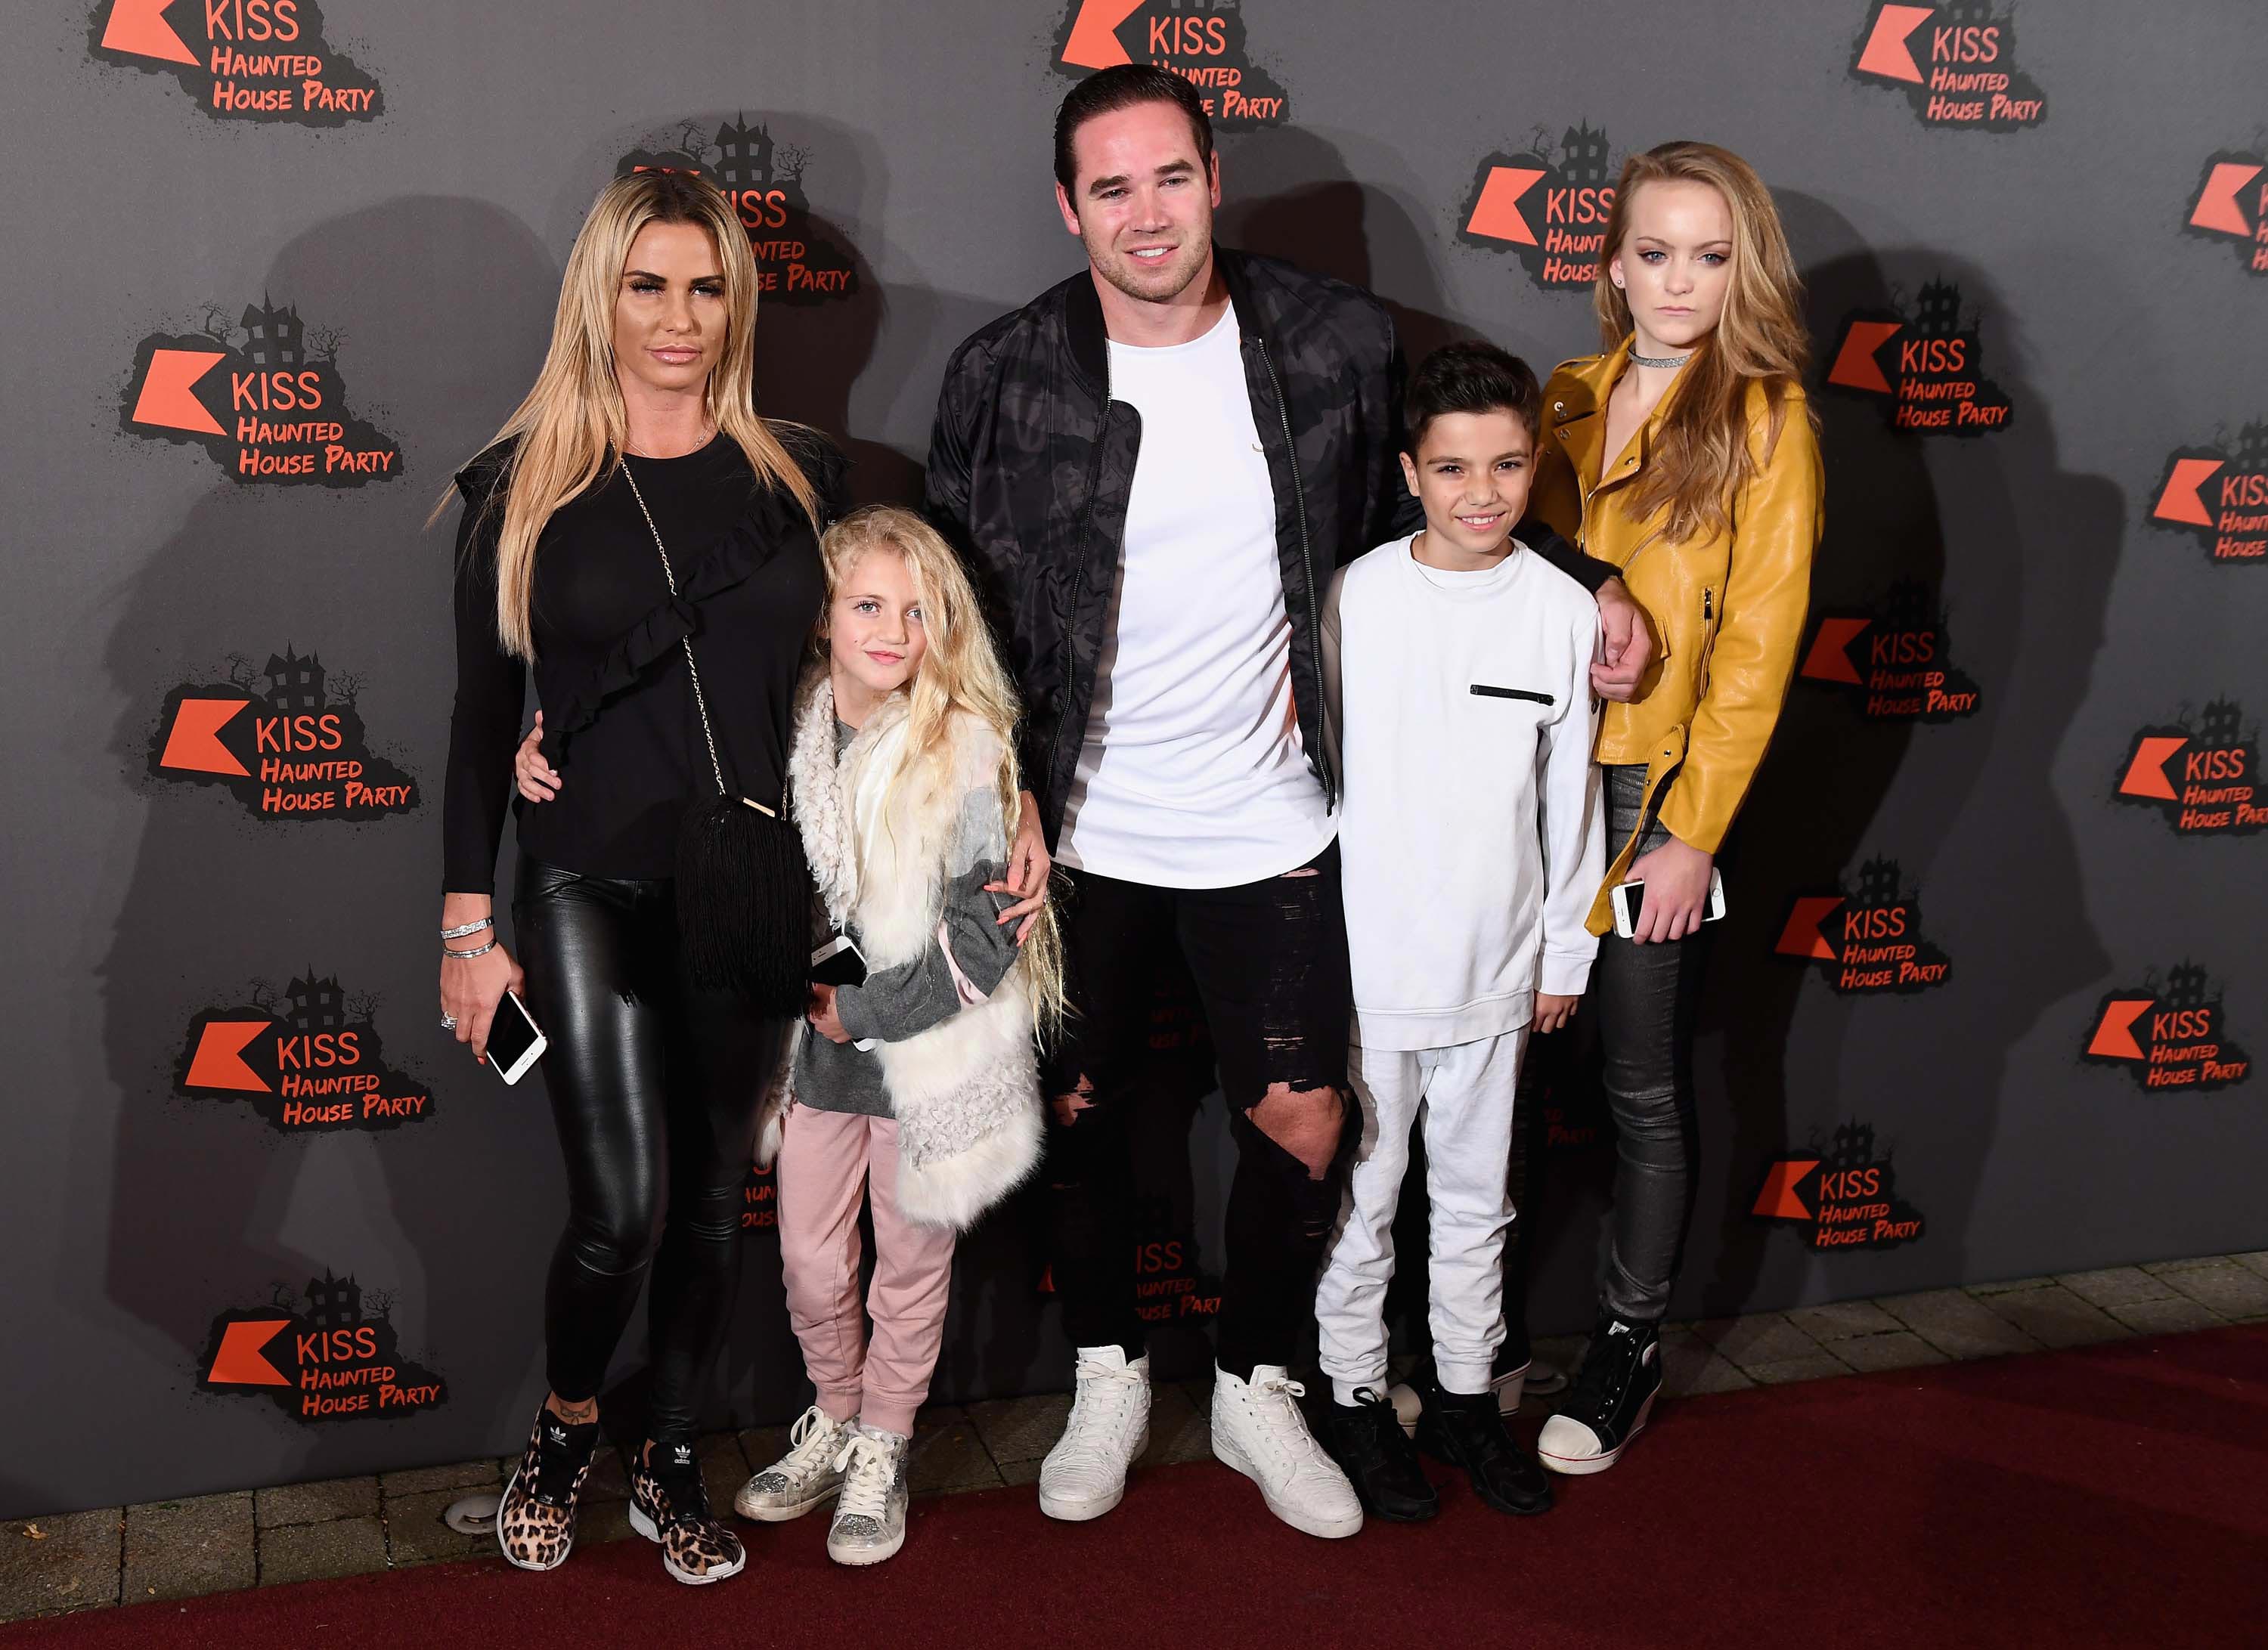 Katie Price attends the Kiss FM Haunted House Party